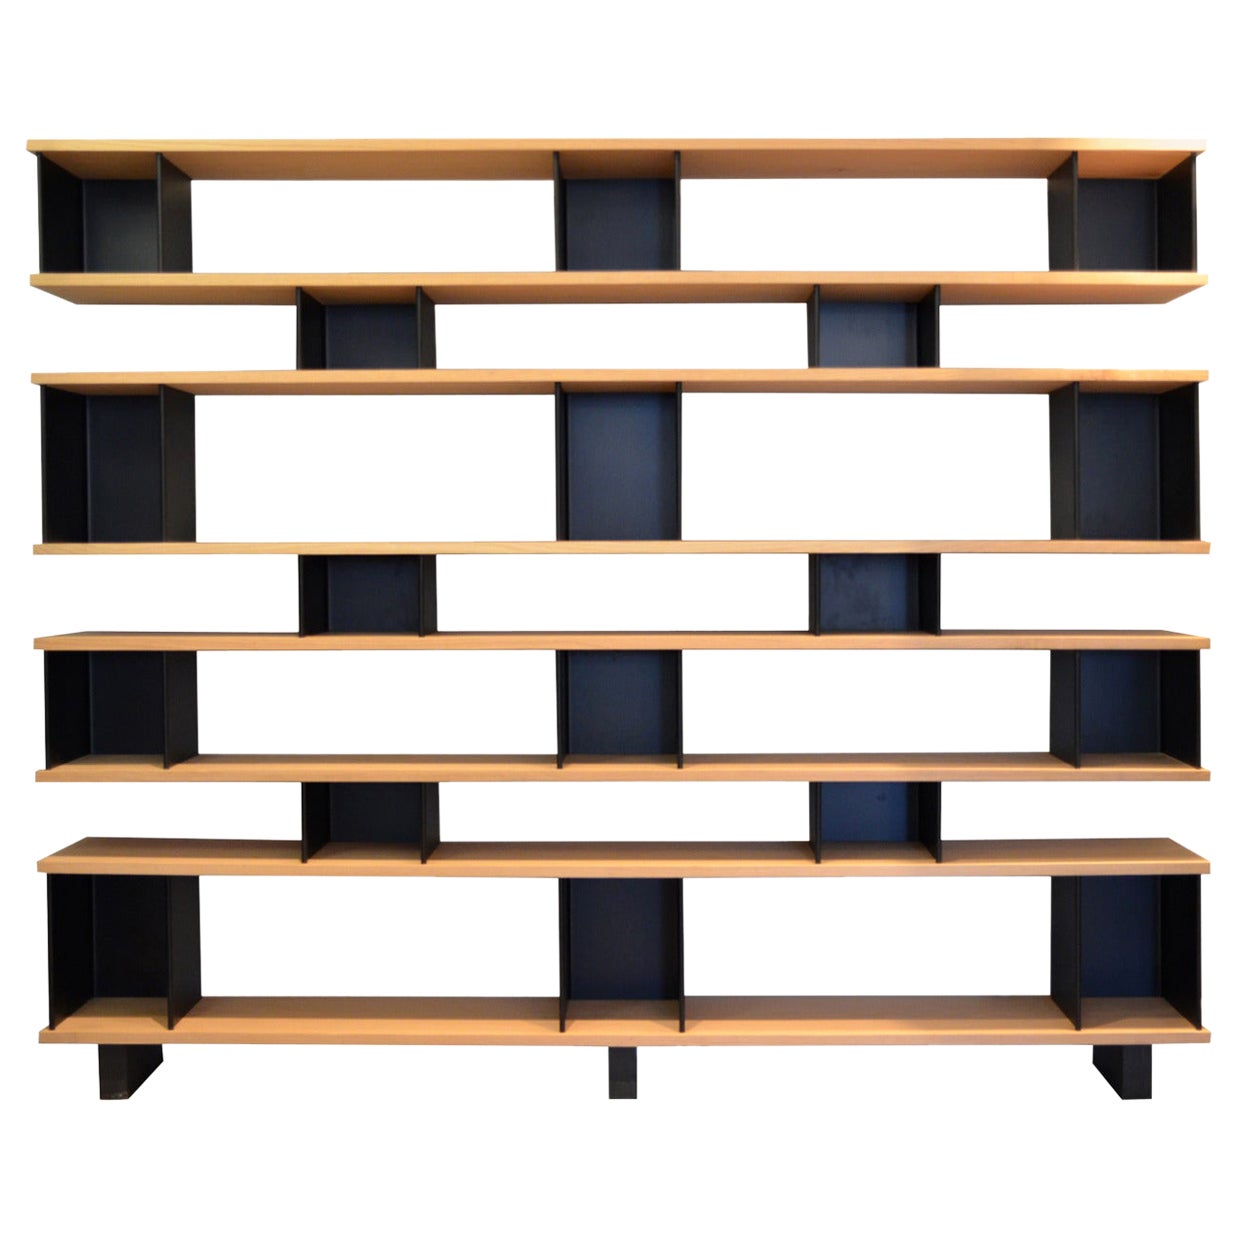 Large 'Horizontale' White Oak and Black Steel Shelving Unit by Design Frères